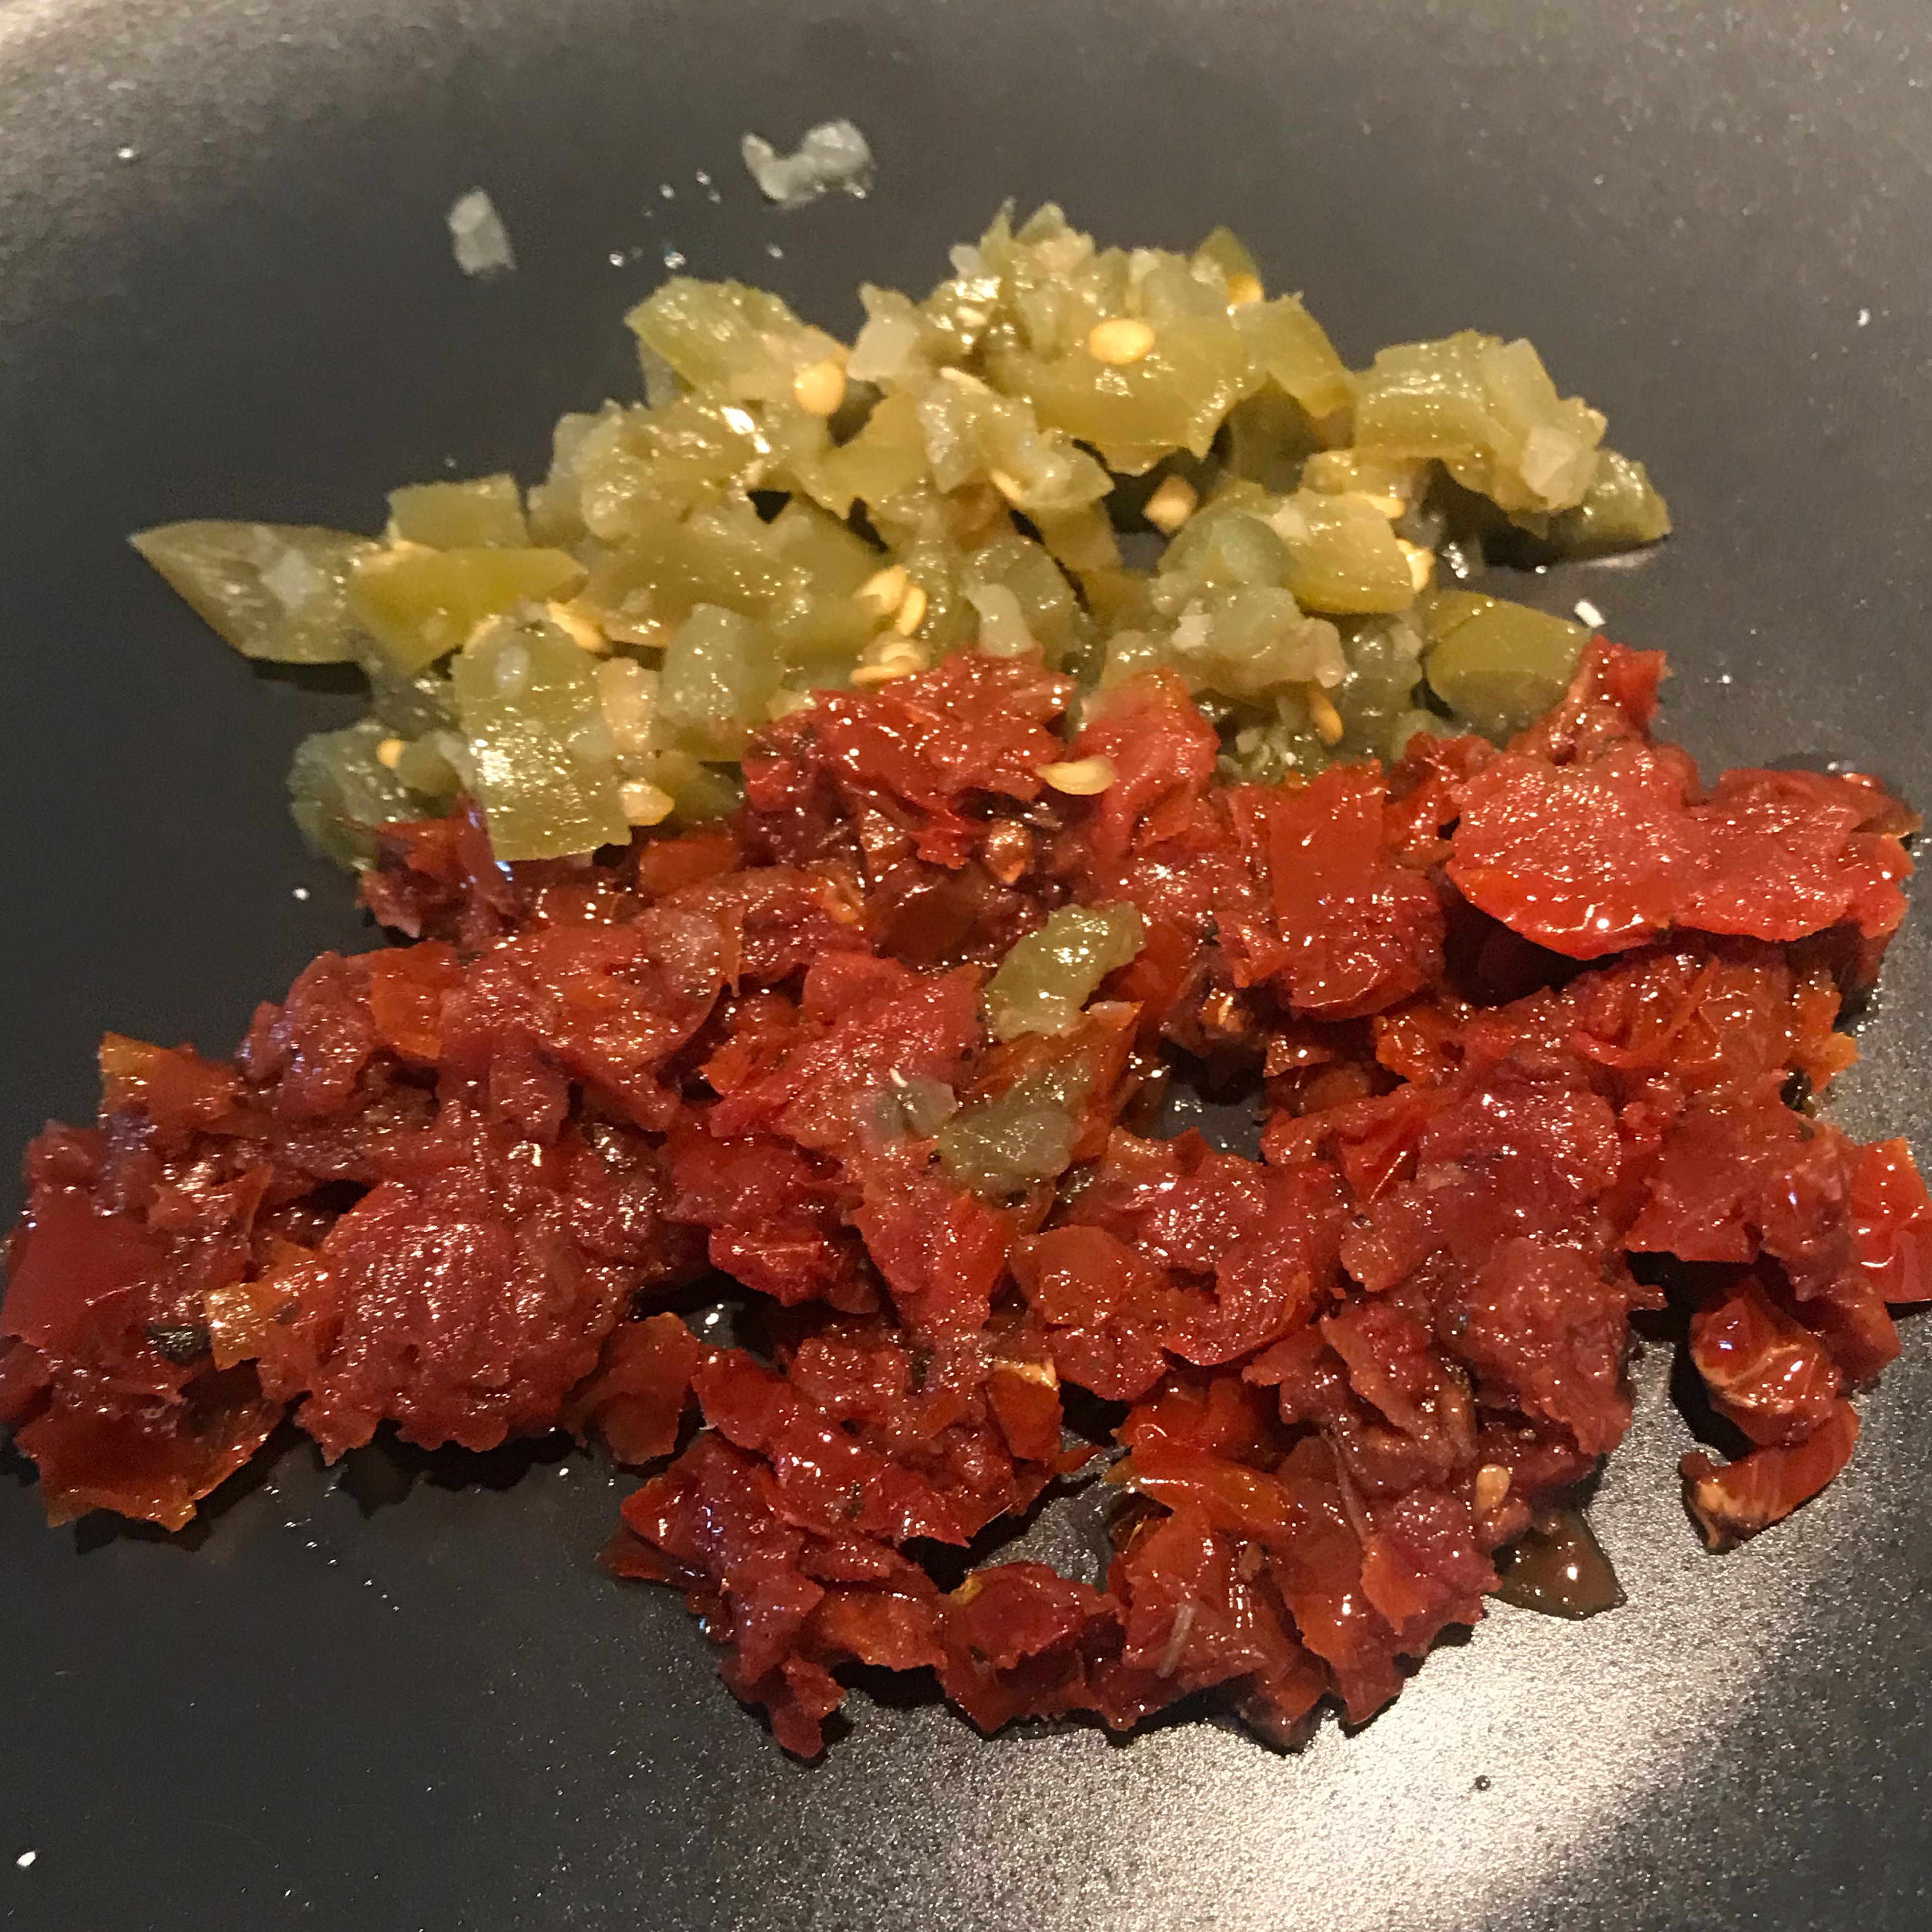 Add chopped dried jalapeno and tomatoes to the pan and fry 1-2 minutes